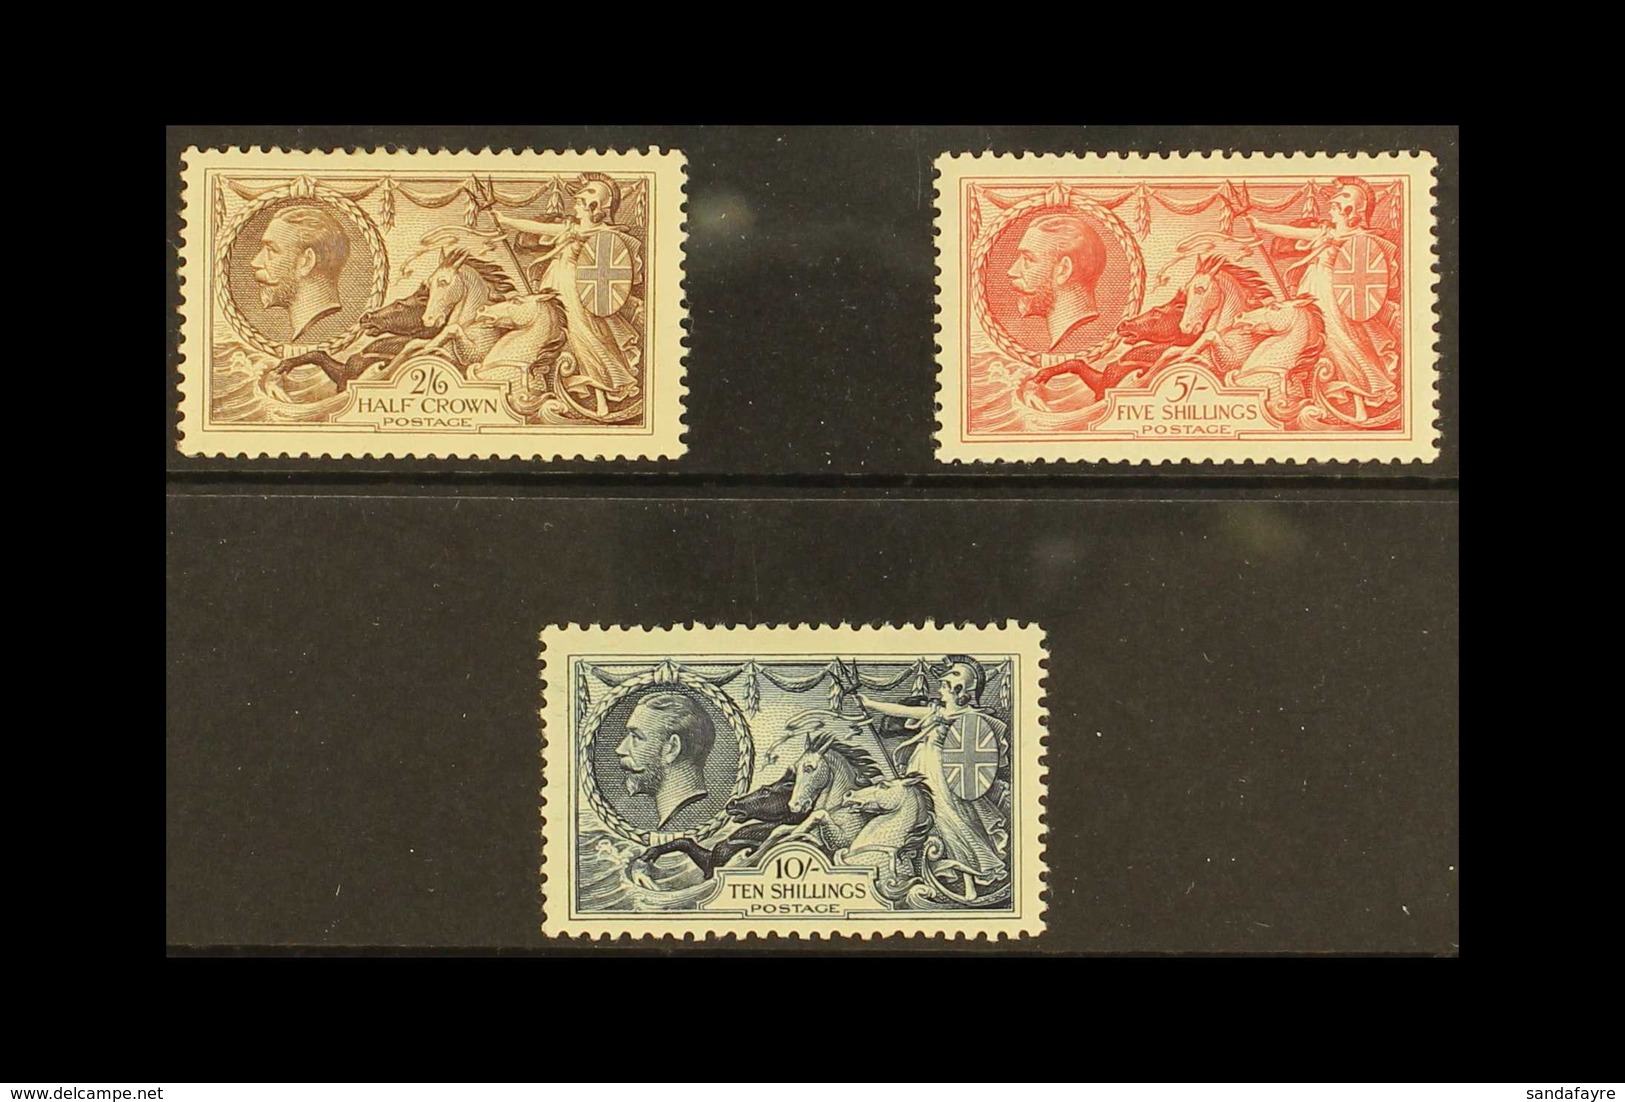 1934 Re-engraved Seahorses Set Complete, SG 450/52, Mint Lightly Hinged. Lovely Quality (3 Stamps) For More Images, Plea - Unclassified